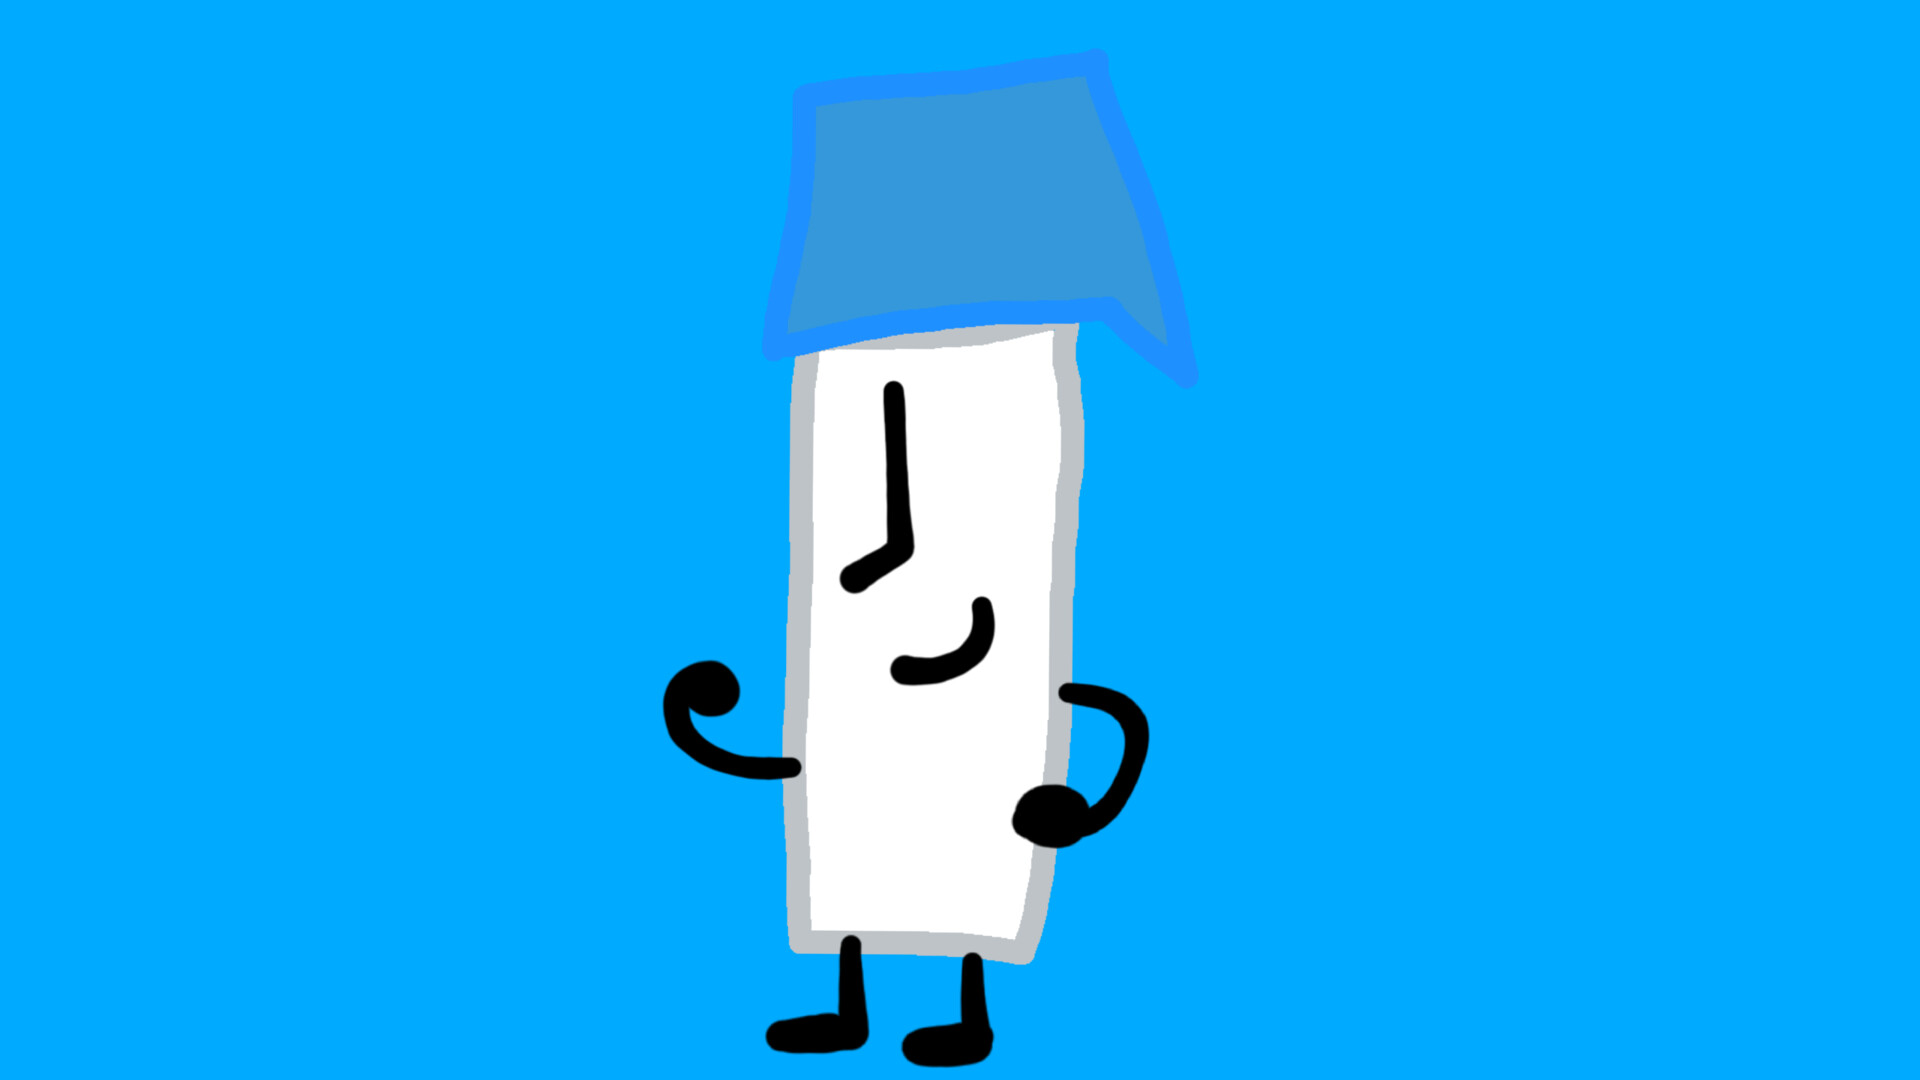 ArtStation - Battle For BFDI background collection